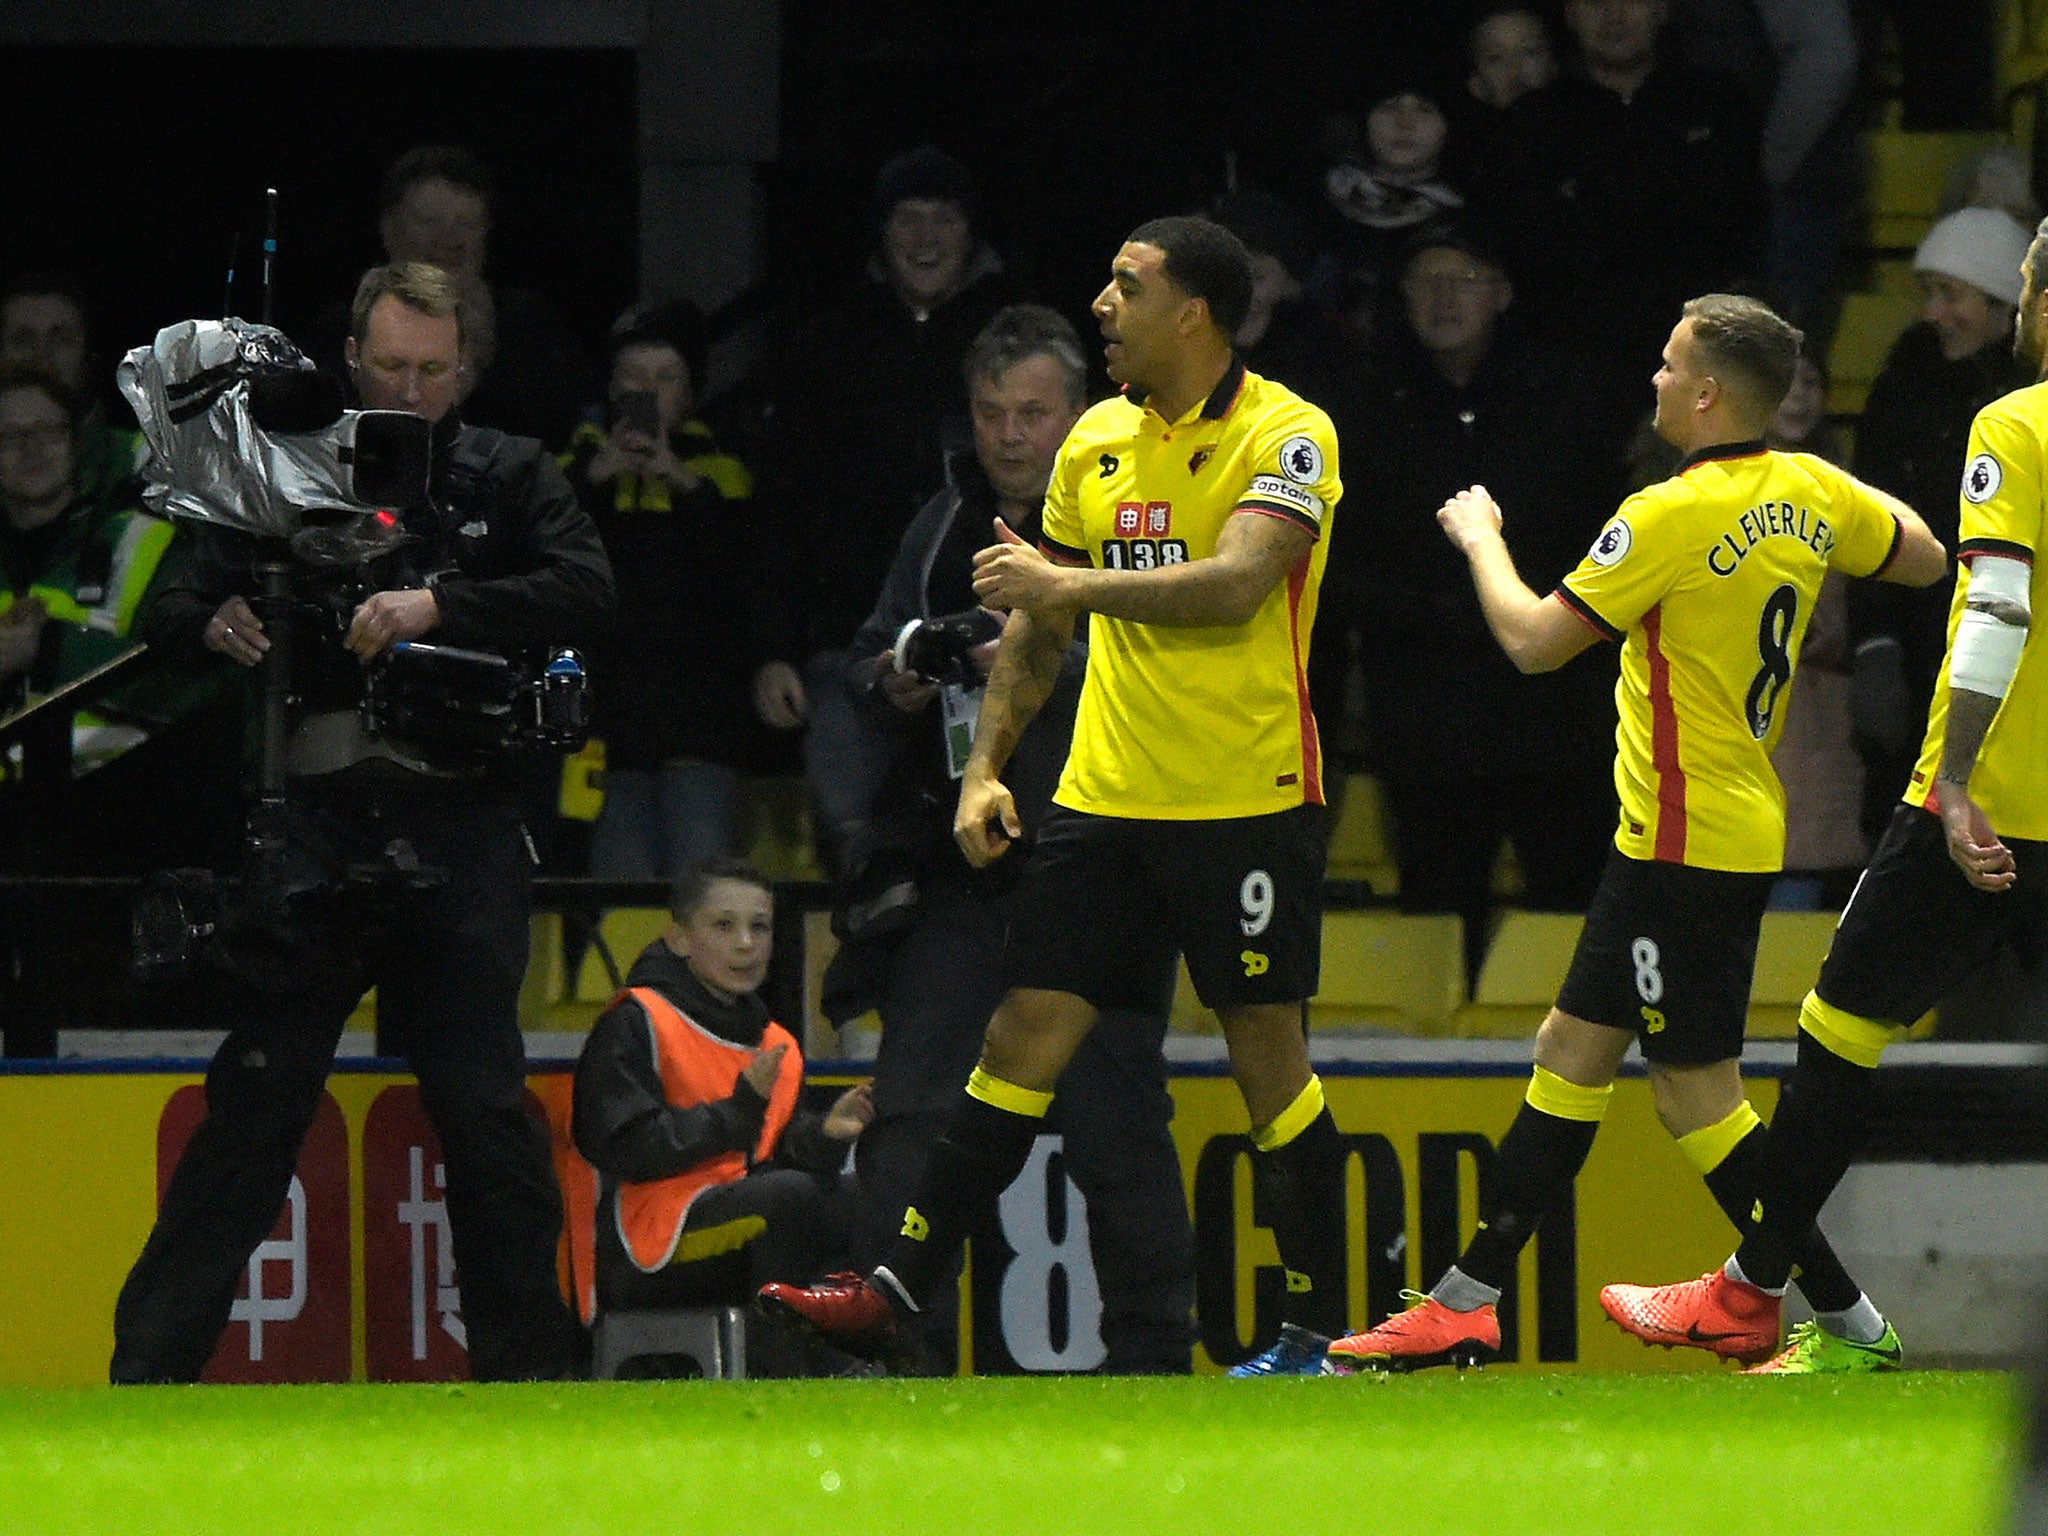 Troy Deeney converted from the spot to hand Watford an early lead